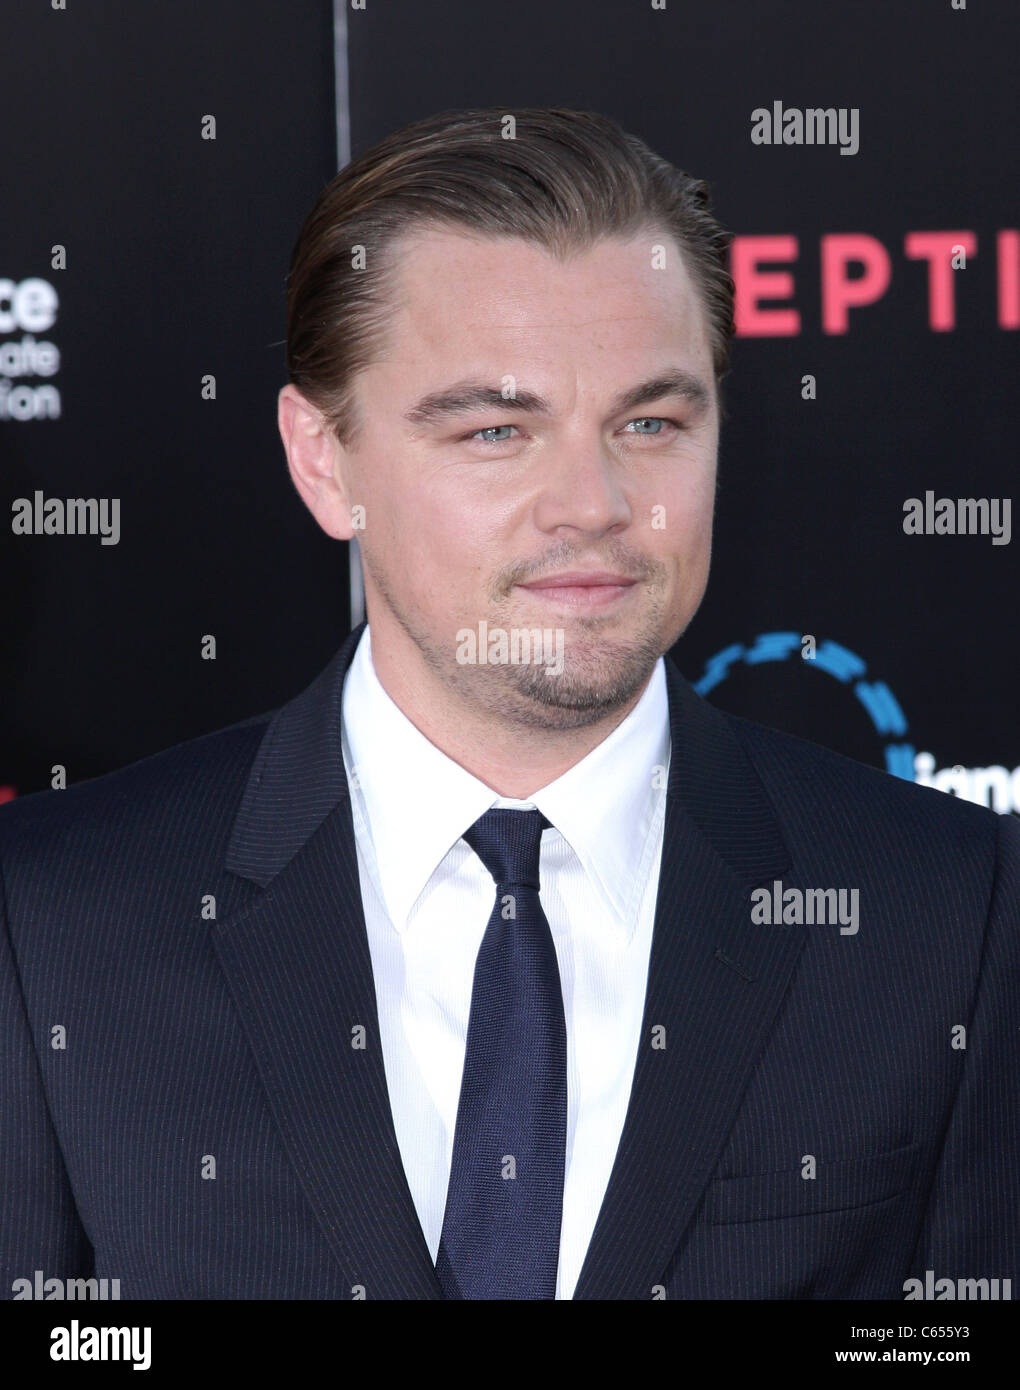 Leonardo DiCaprio at arrivals for INCEPTION Premiere, Grauman's Chinese Theatre, Los Angeles, CA July 13, 2010. Photo By: James Stock Photo